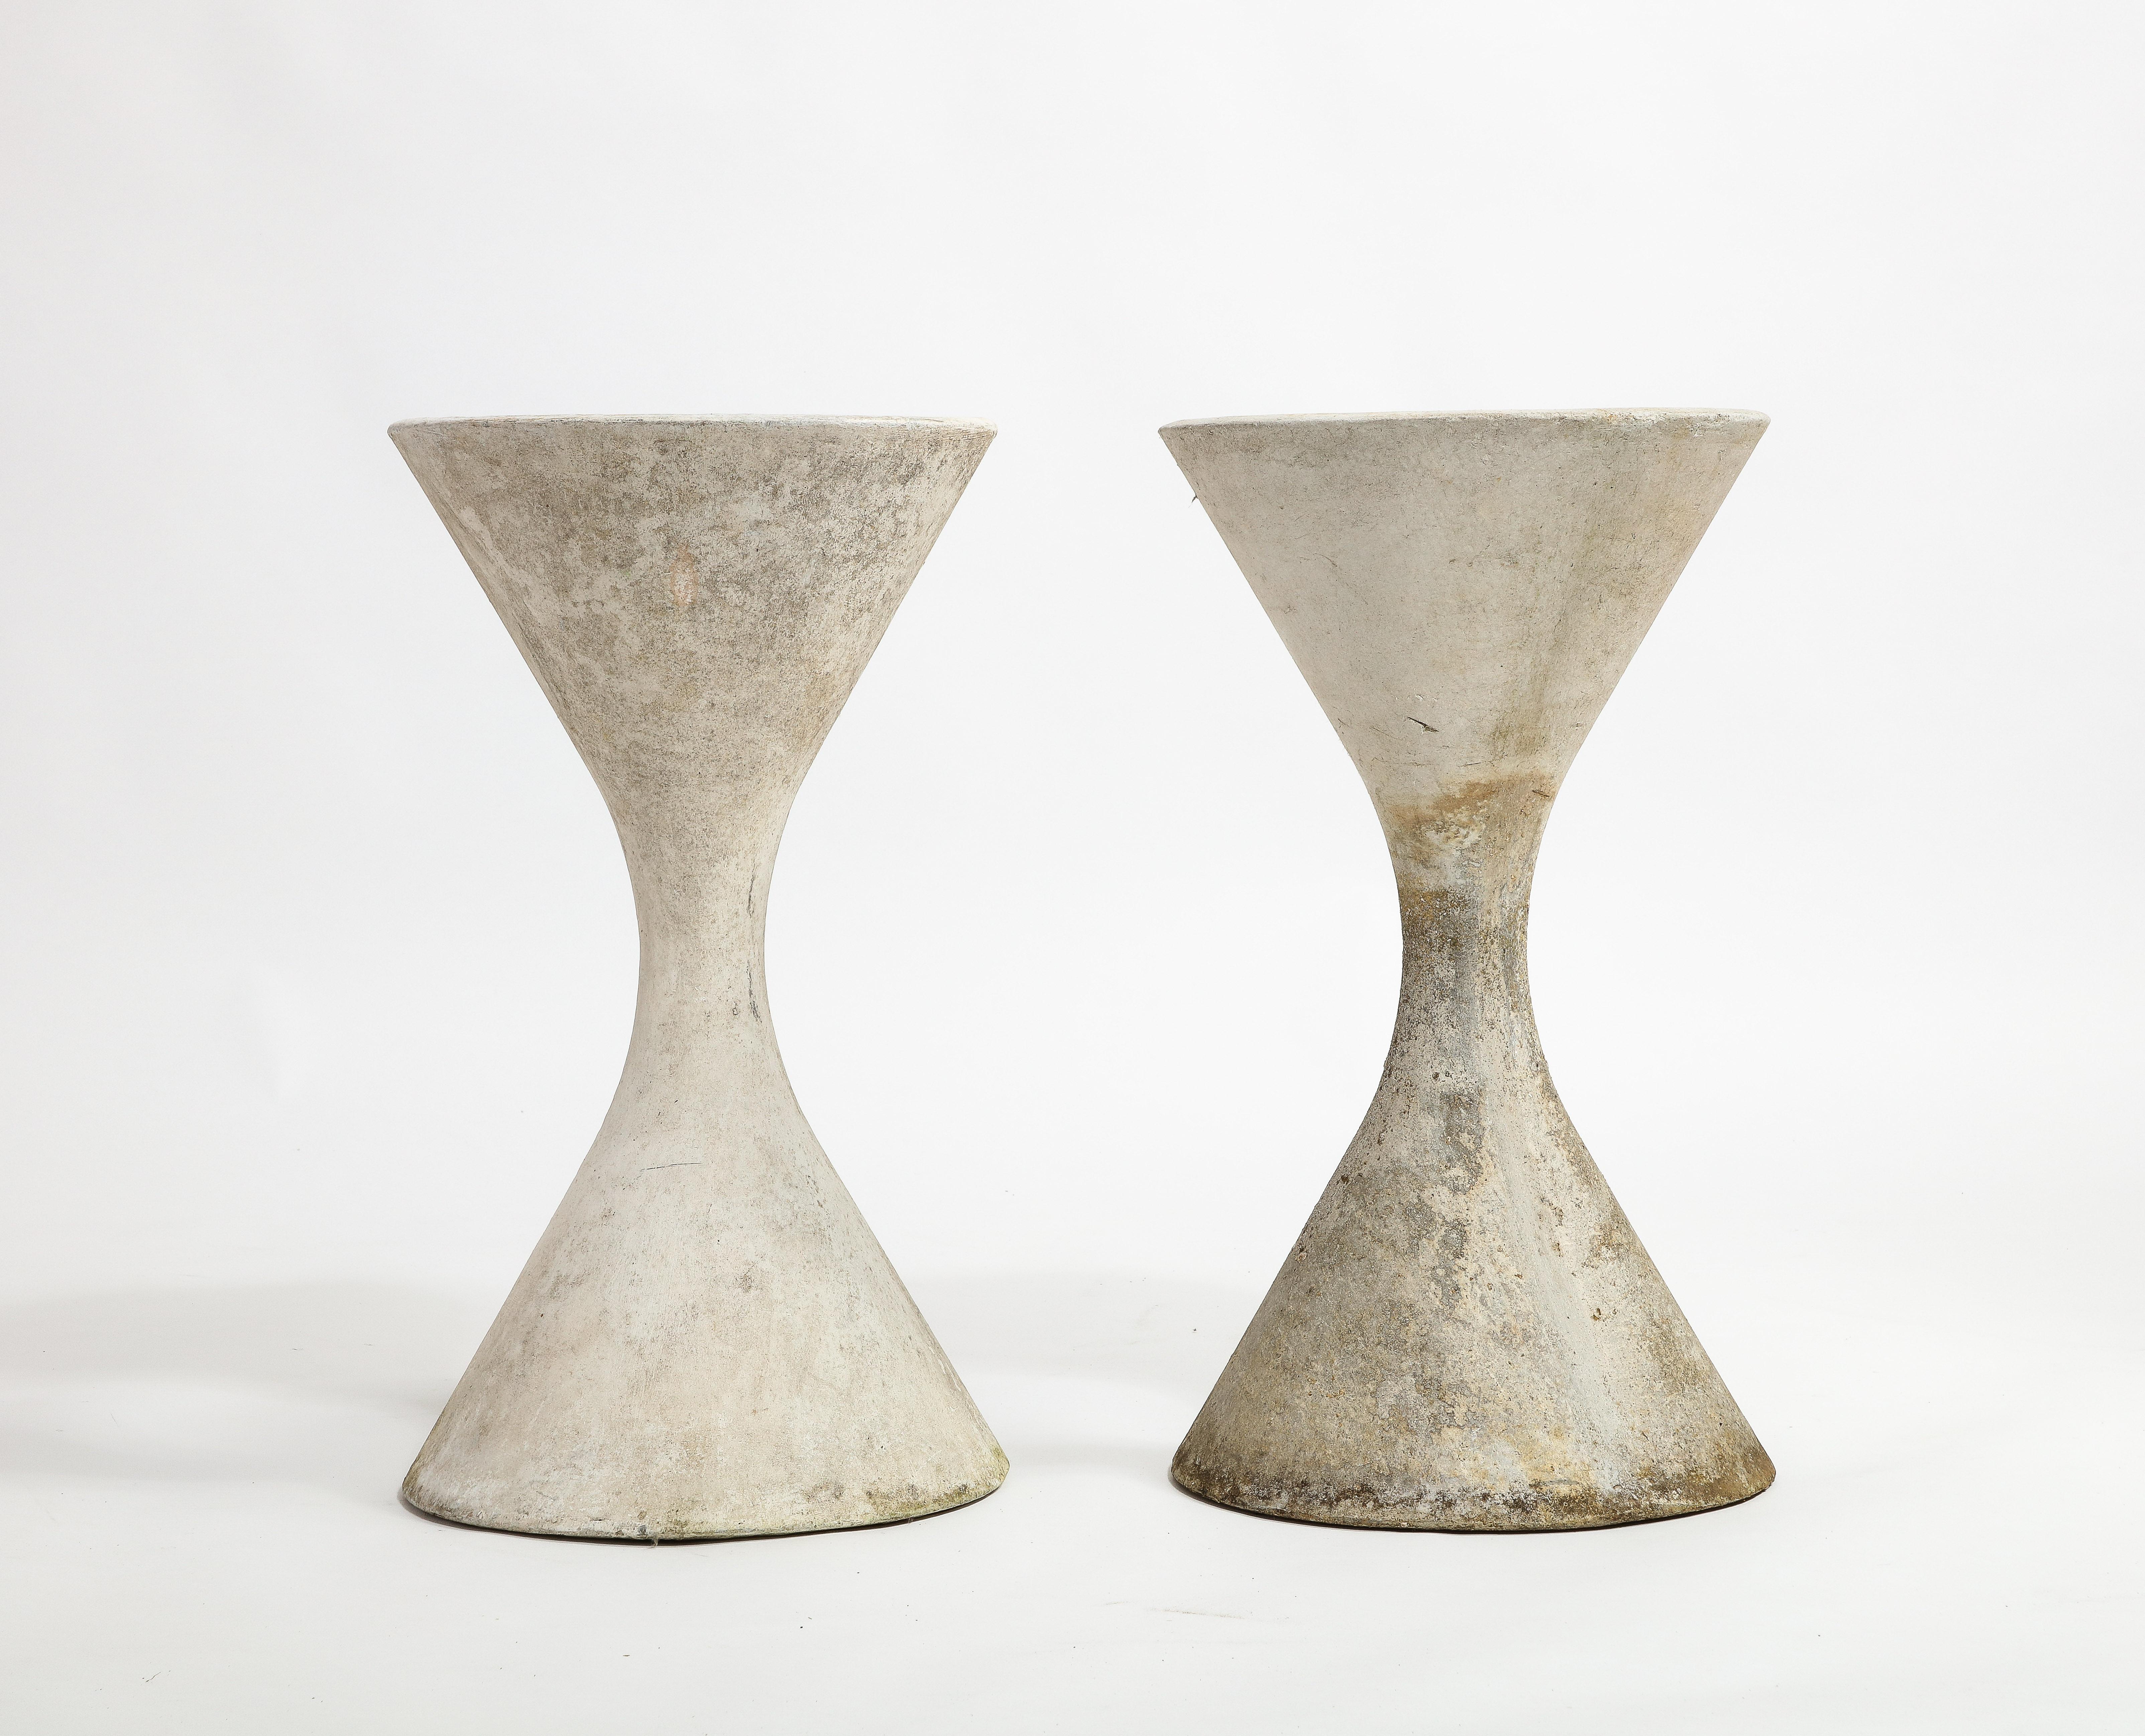 Willy Guhl for Eternit Medium Concrete Diabolo Spindel Planters, 1960s In Good Condition For Sale In New York, NY